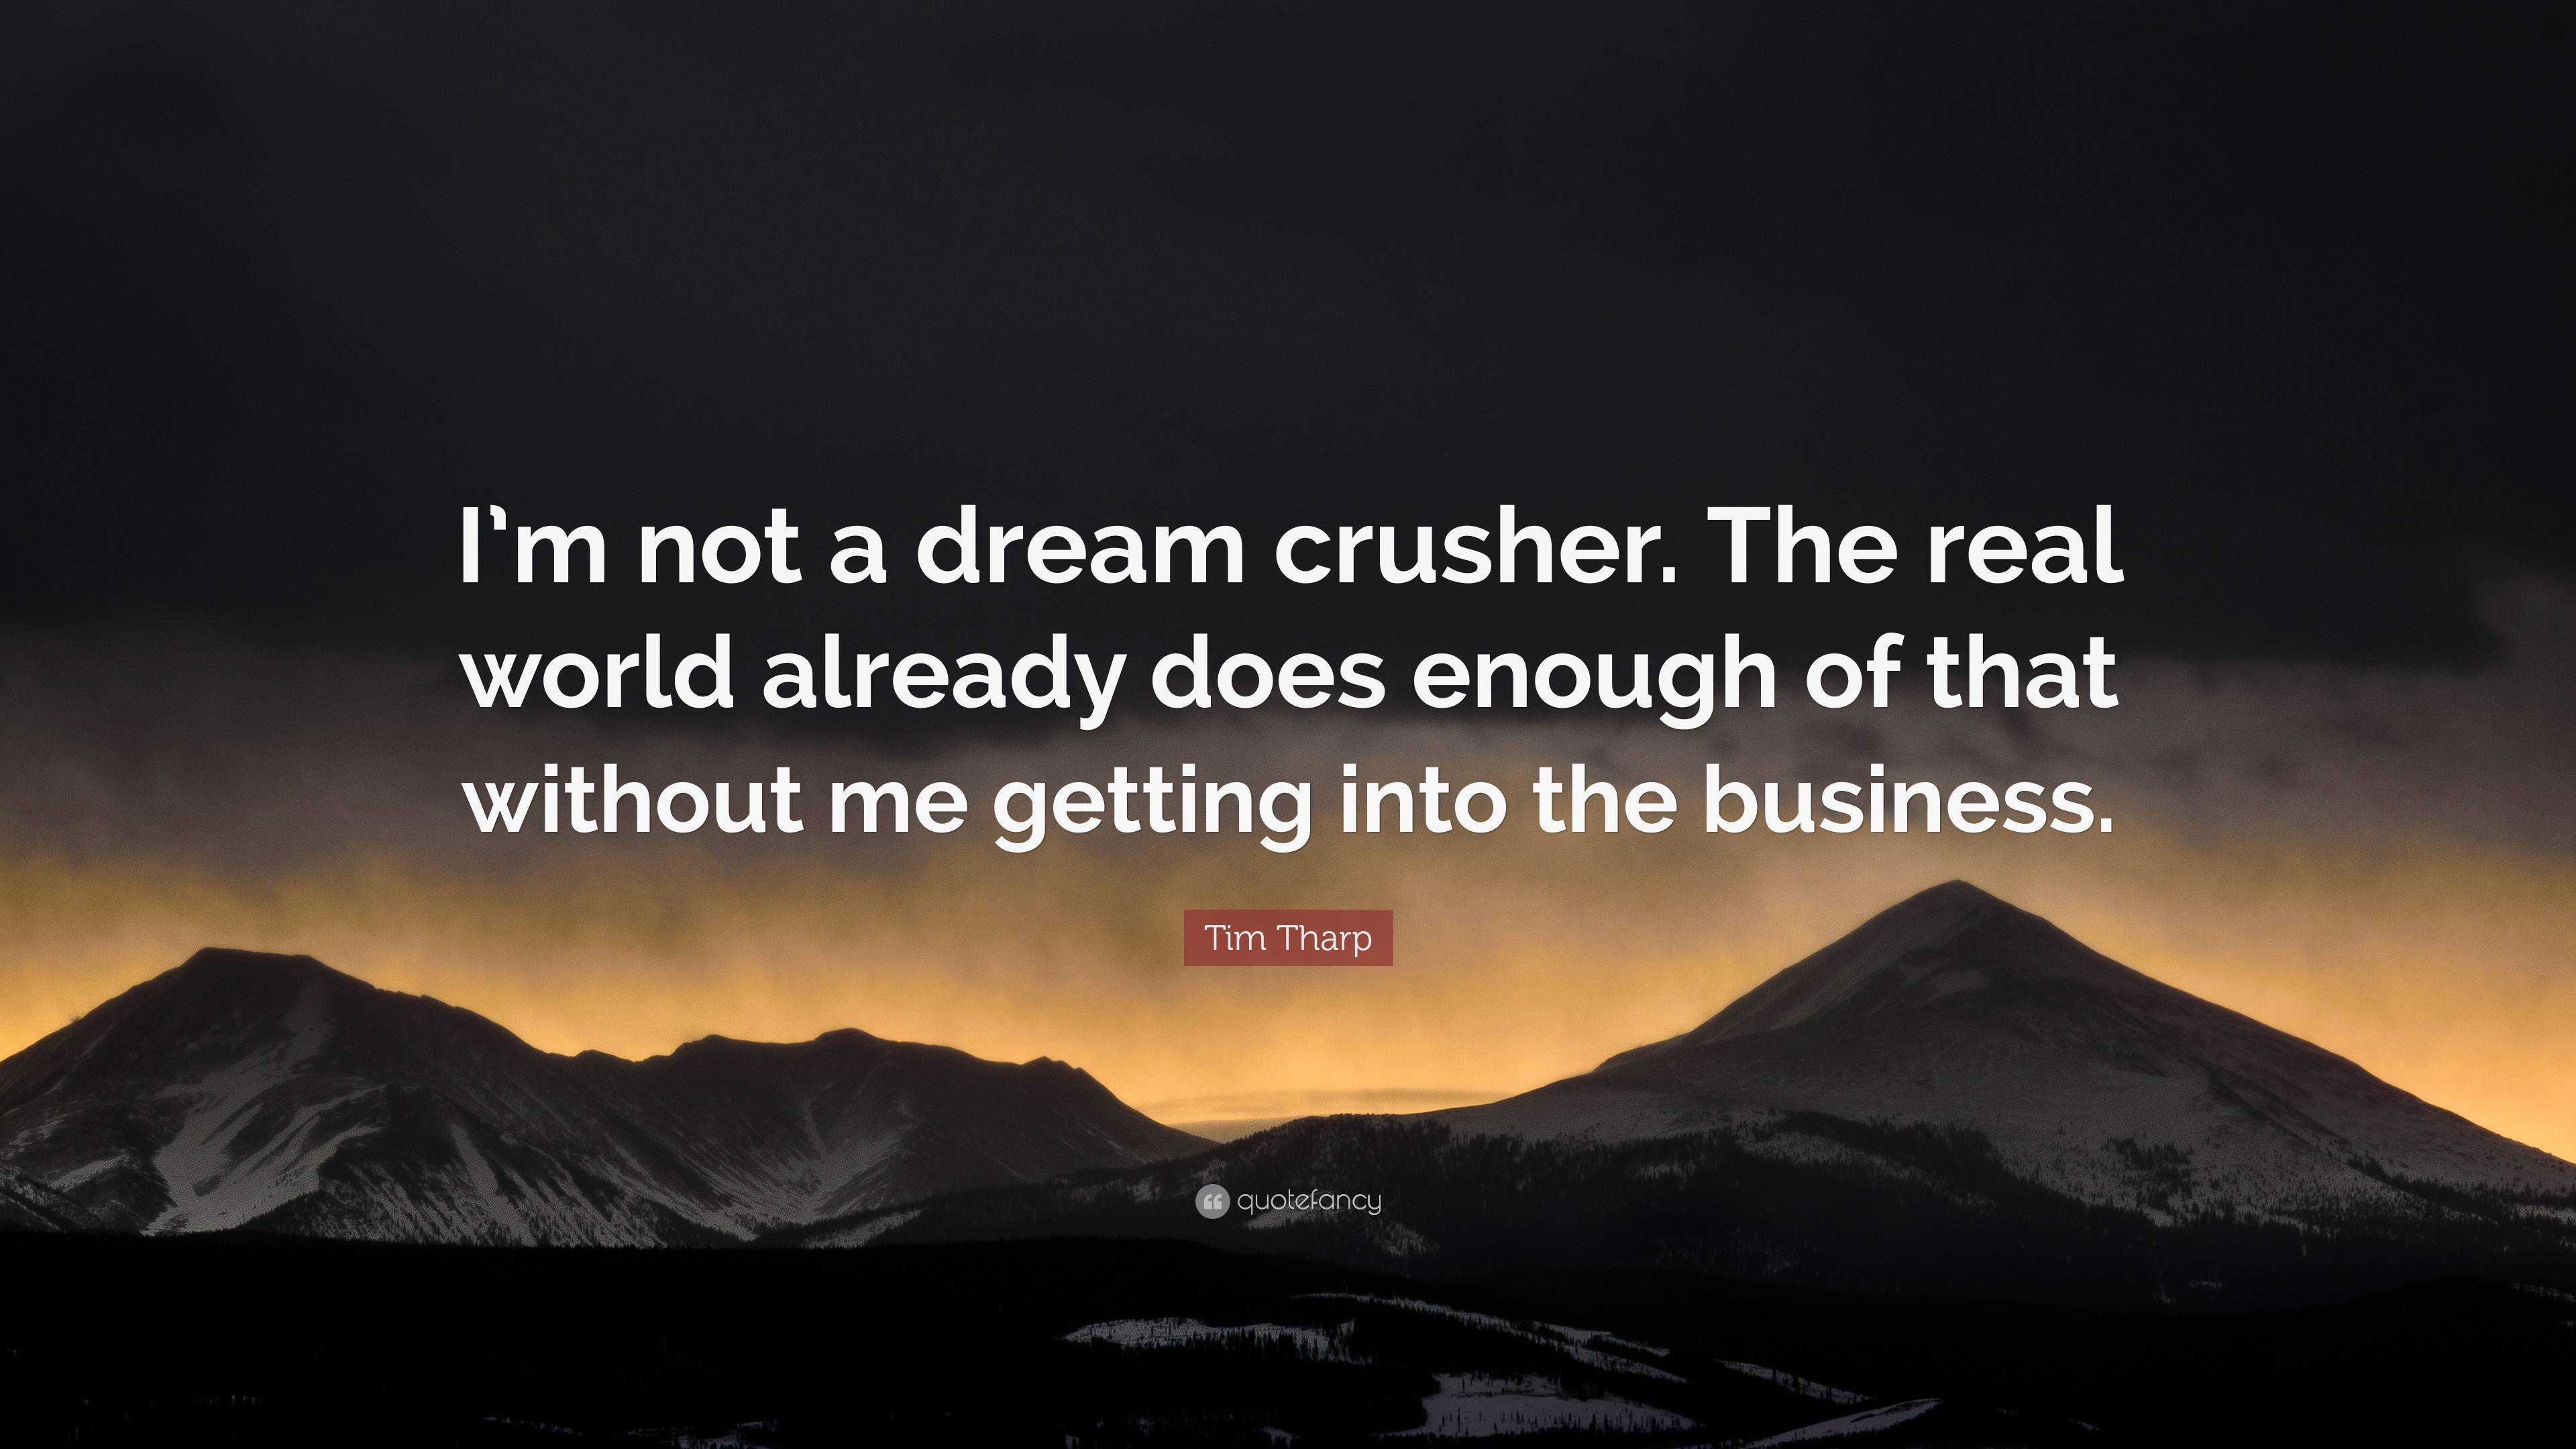 Tim Tharp Quote: “I'm not a dream crusher. The real world already does  enough of